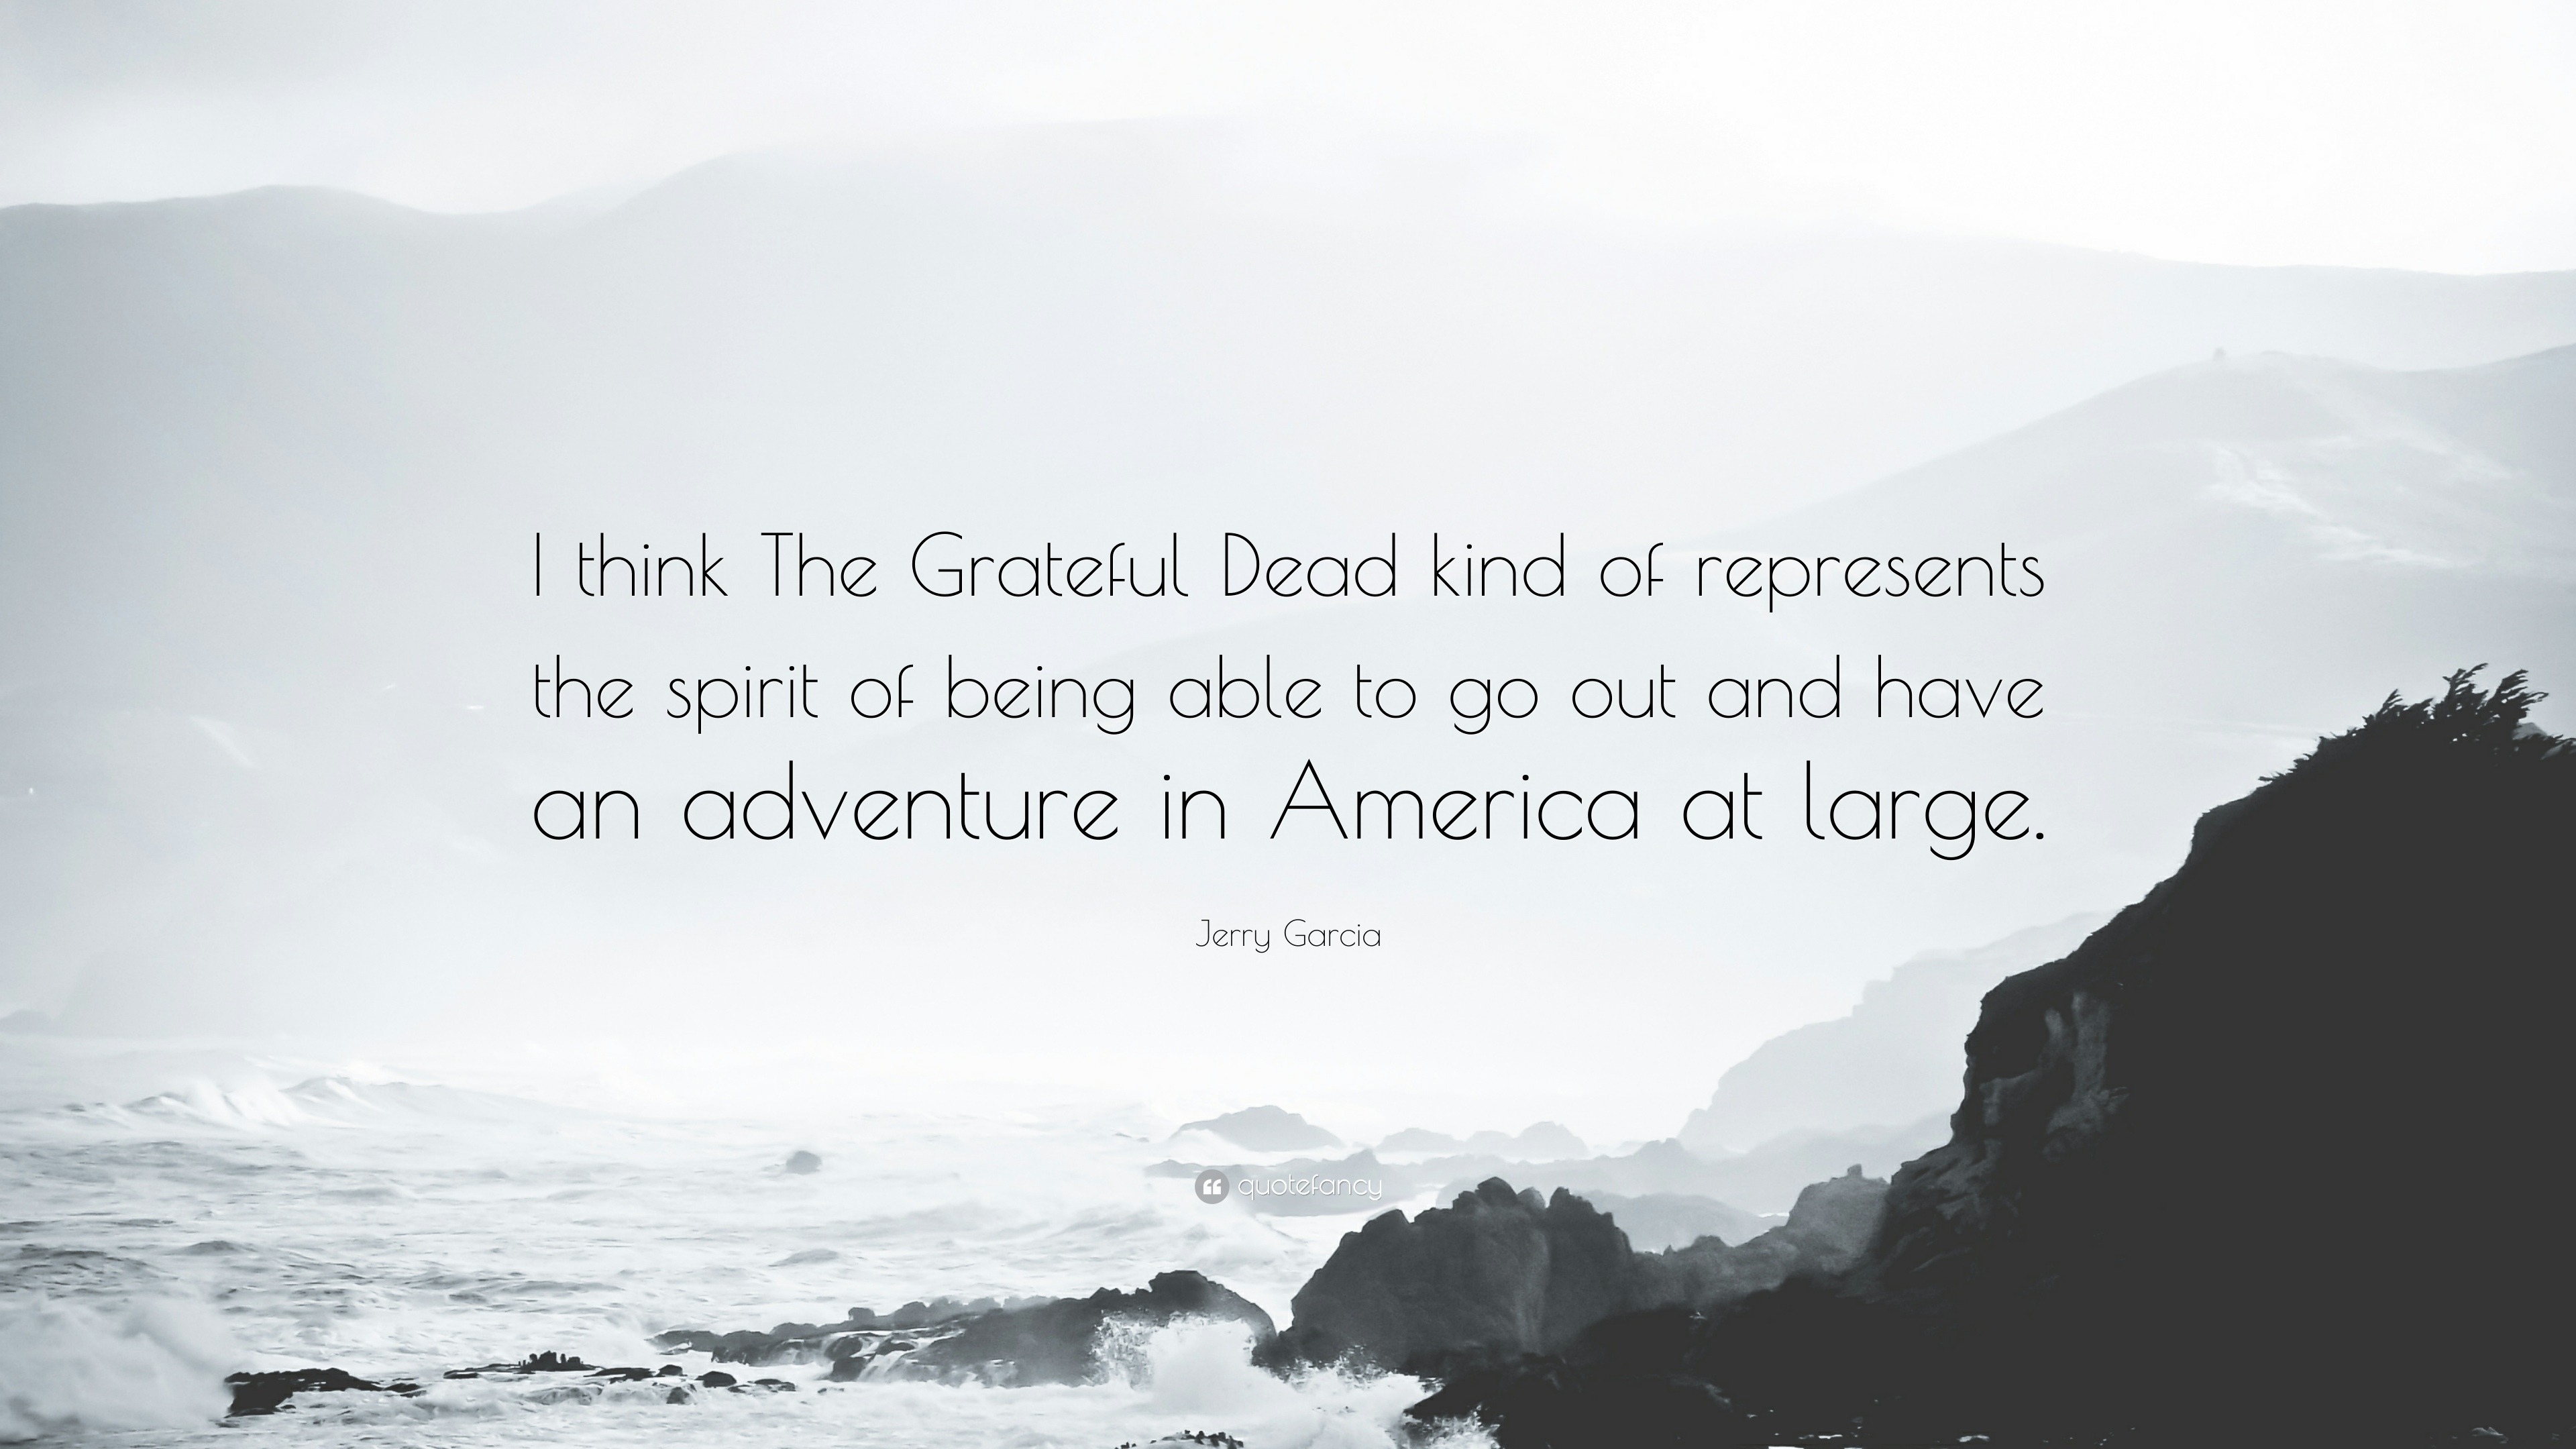 Jerry Garcia Quote: “I think The Grateful Dead kind of represents the  spirit of being able to go out and have an adventure in America at larg...”